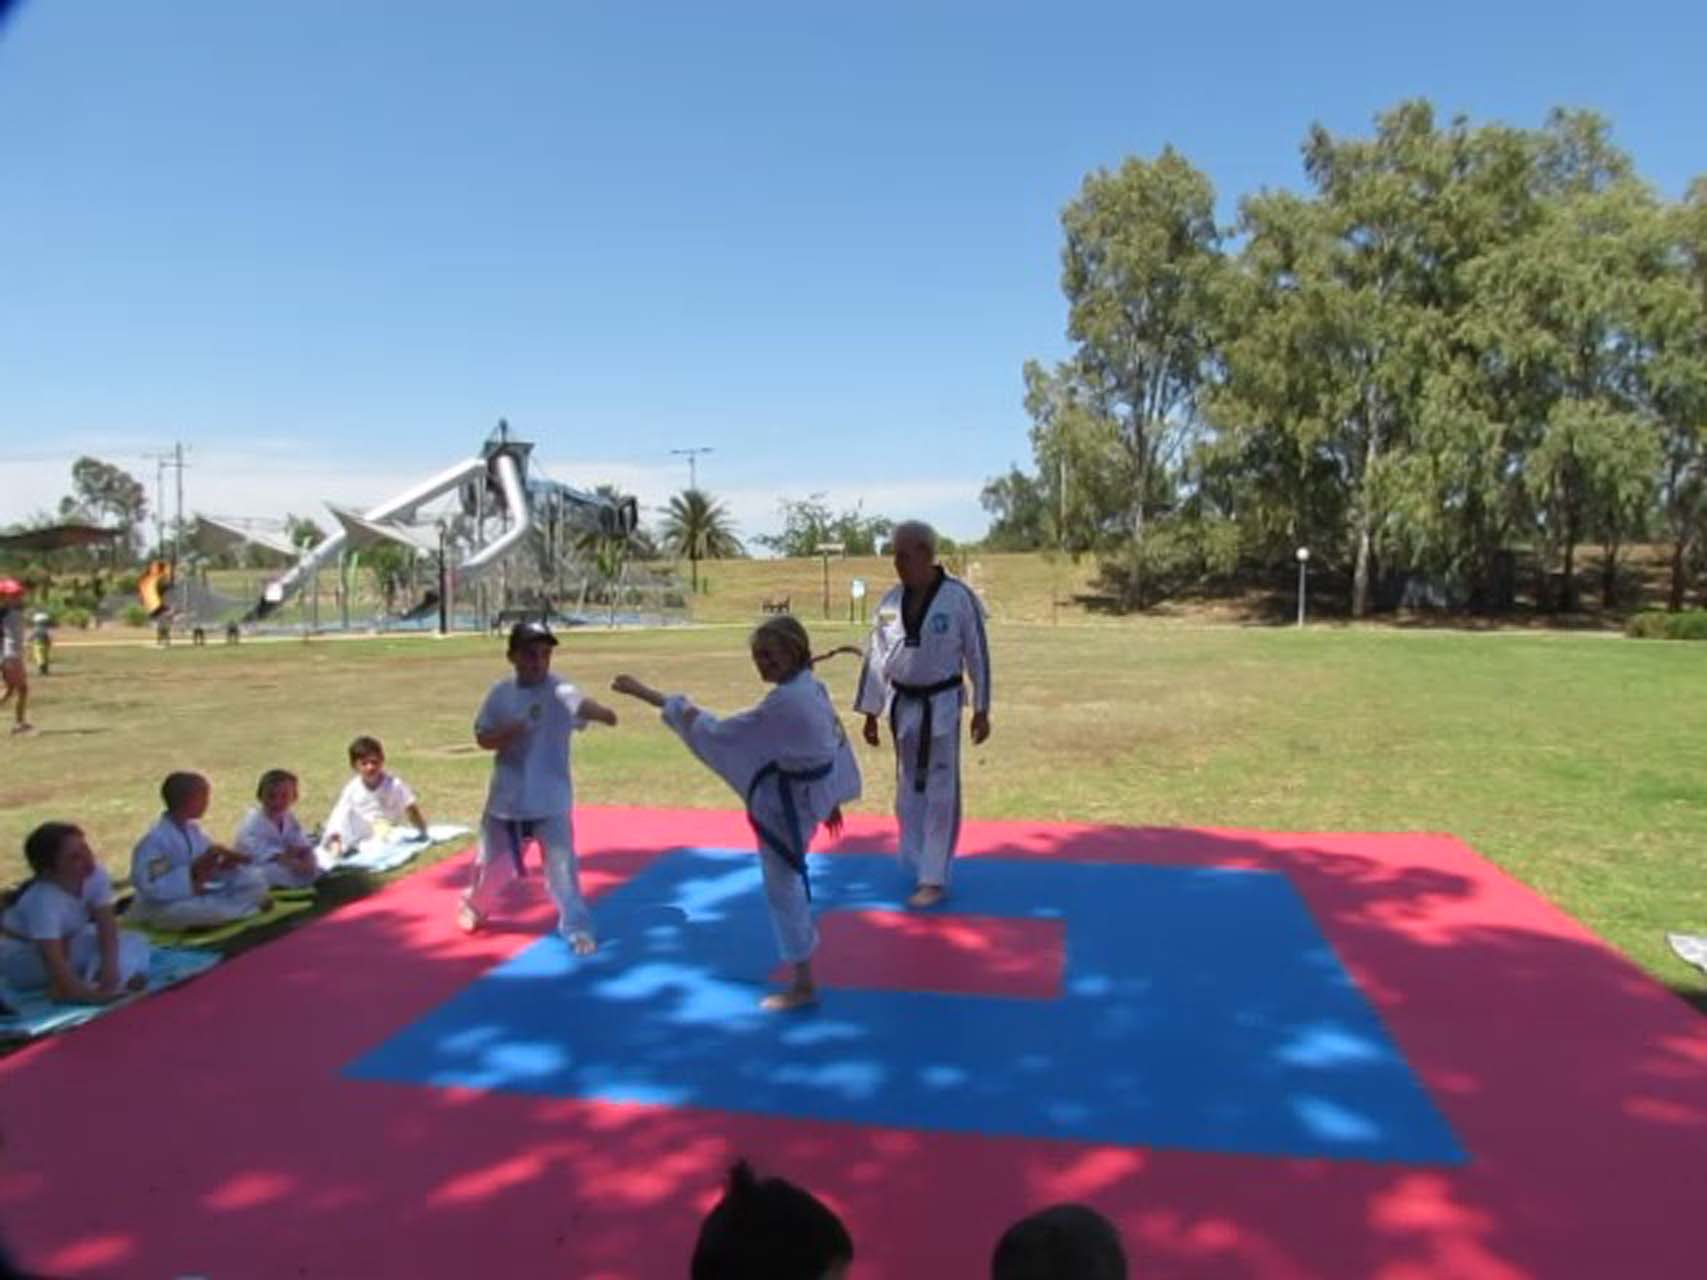 Two students practicing martial arts in Tamworth on a Taekwondo mat